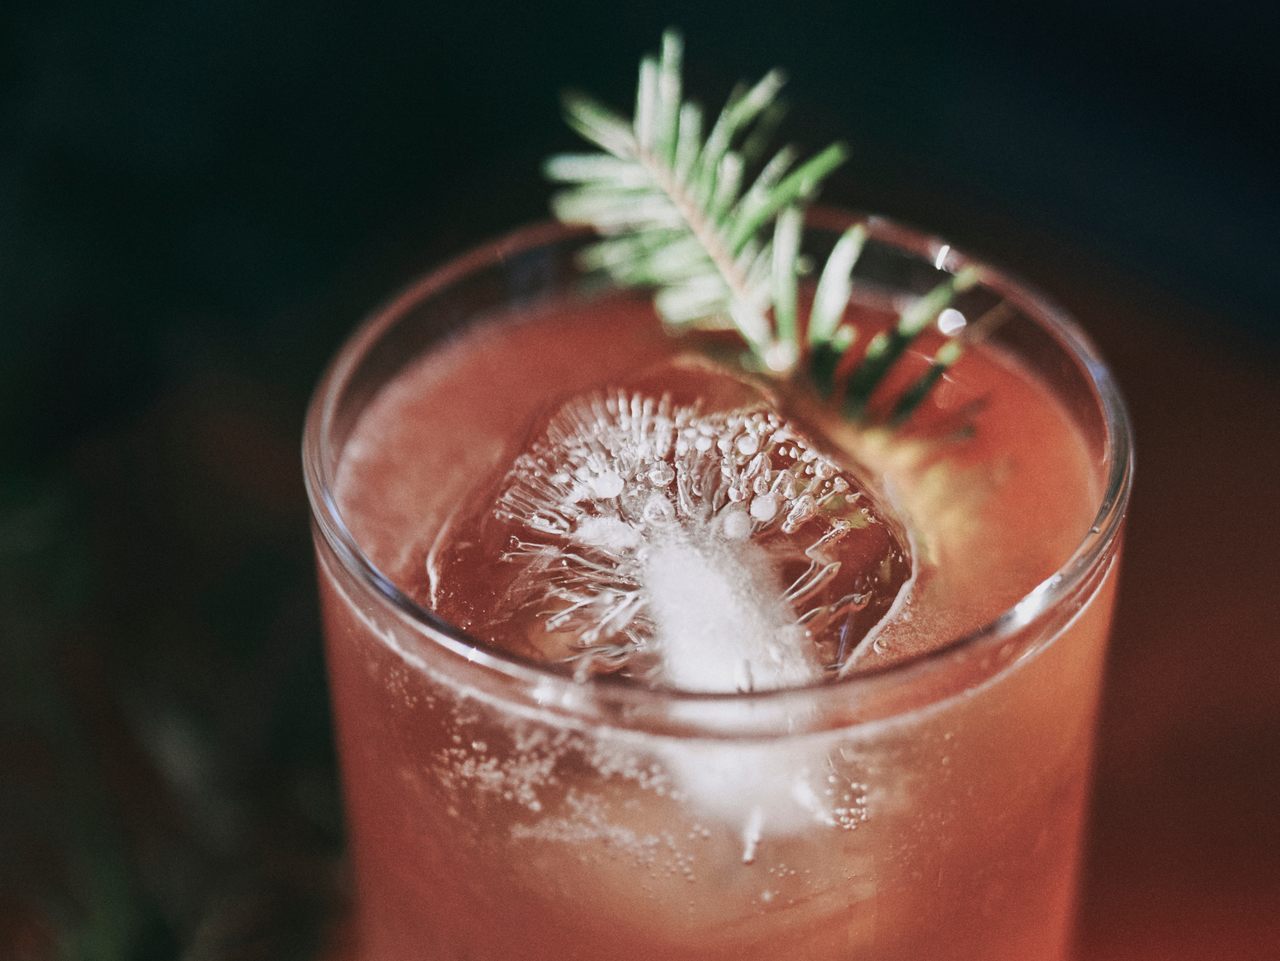 Made by simmering evergreen needles with water, sugar, and lemon, the Christmas tree cordial is a surprising shade of pink.